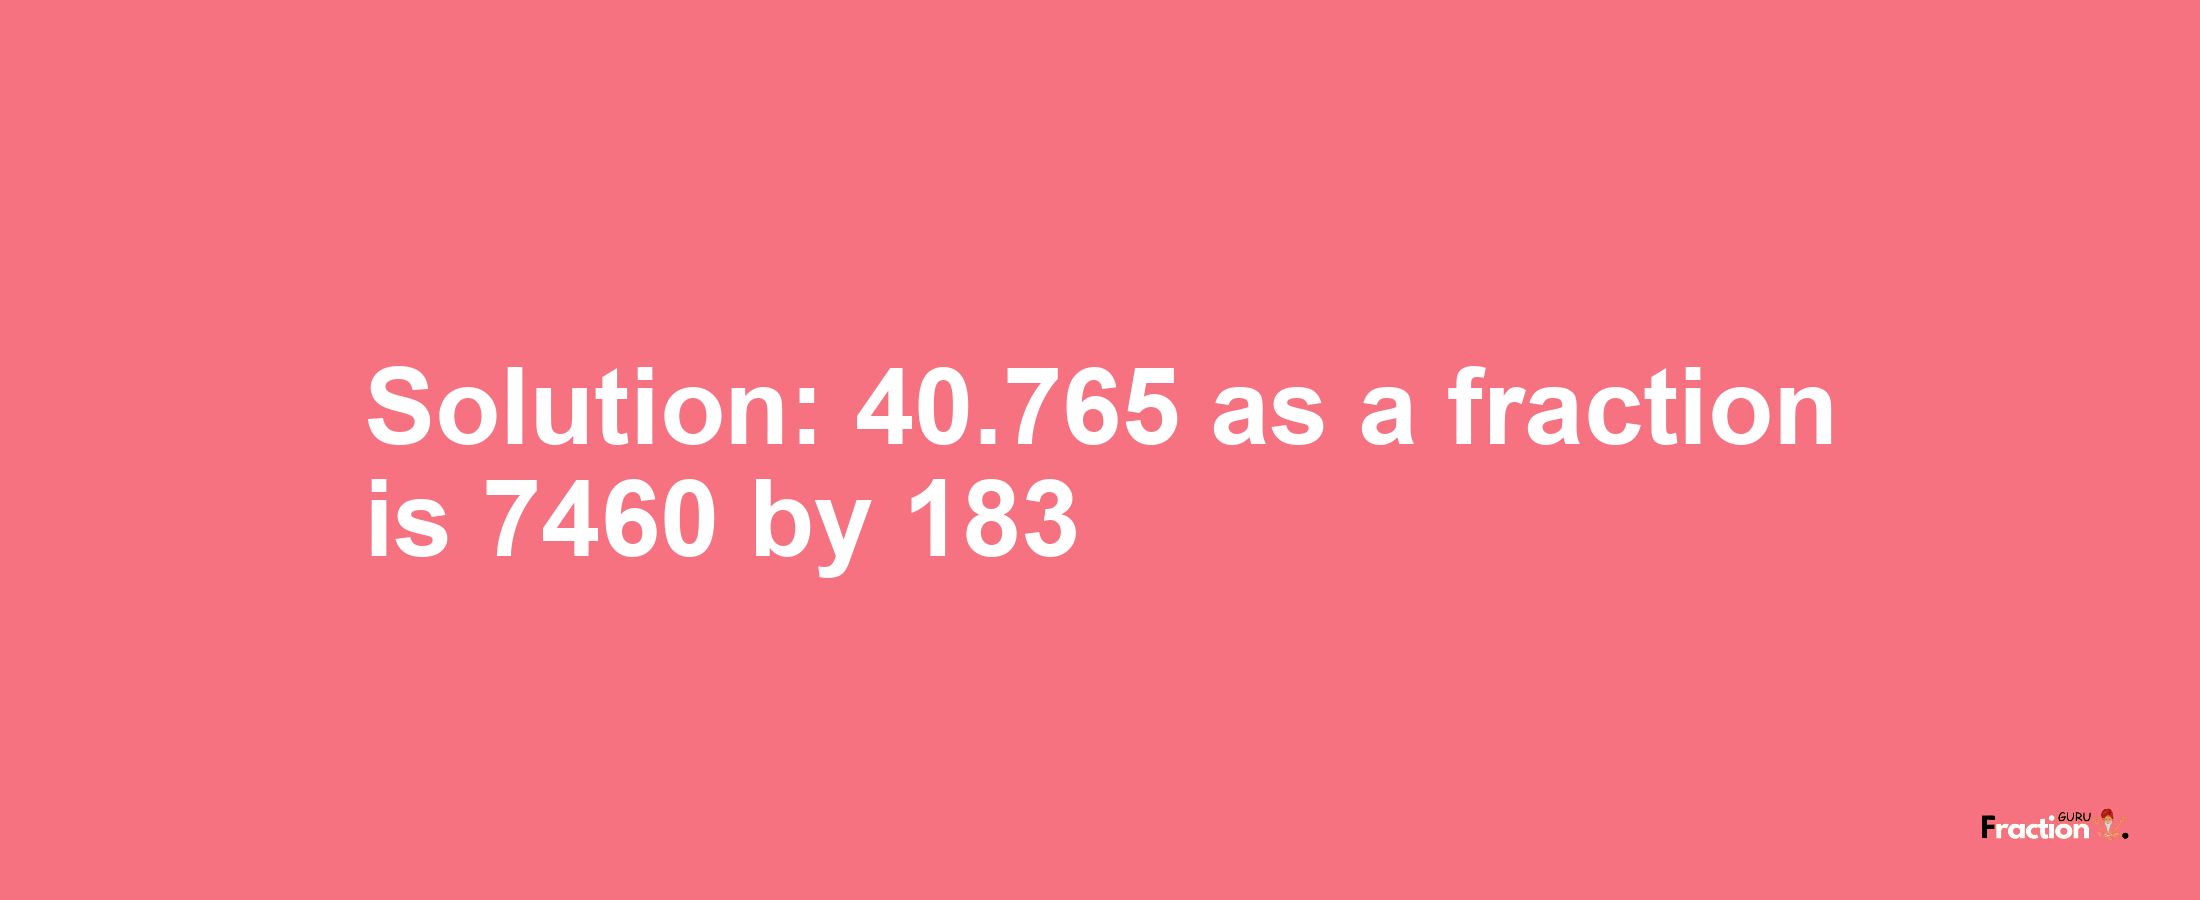 Solution:40.765 as a fraction is 7460/183